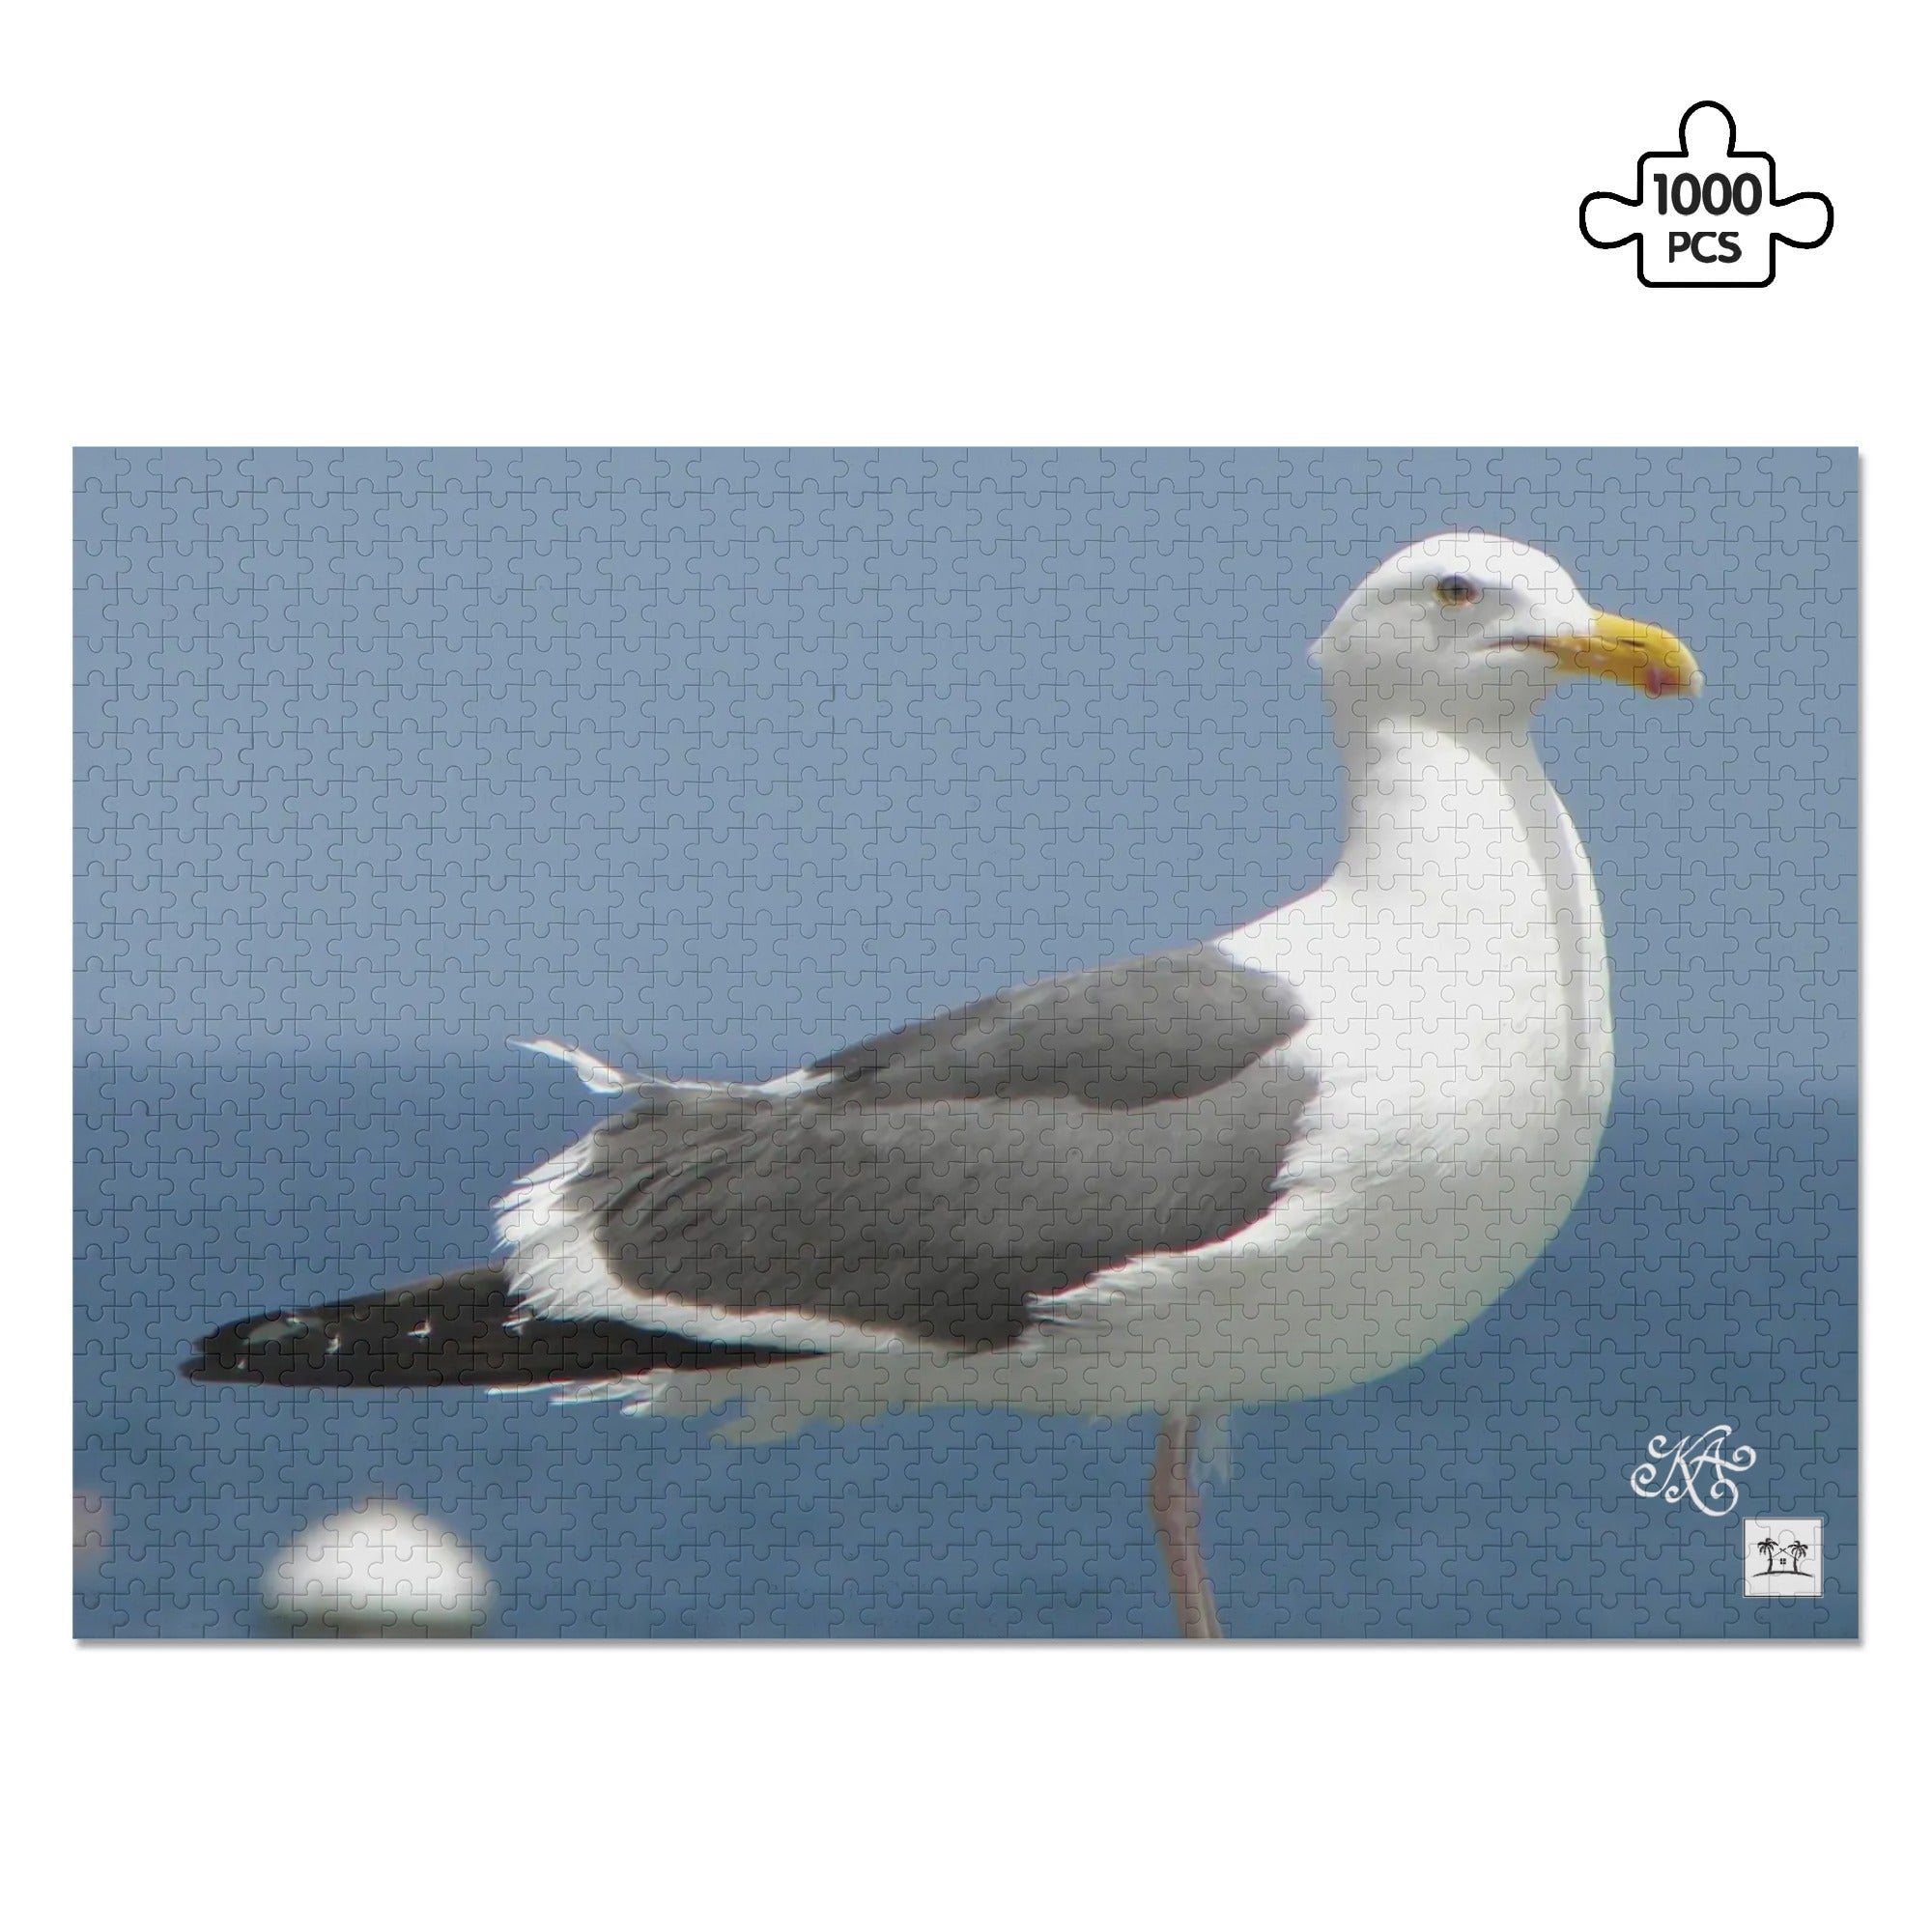 Wooden Jigsaw Puzzle (1000 Pcs) - The Seagull